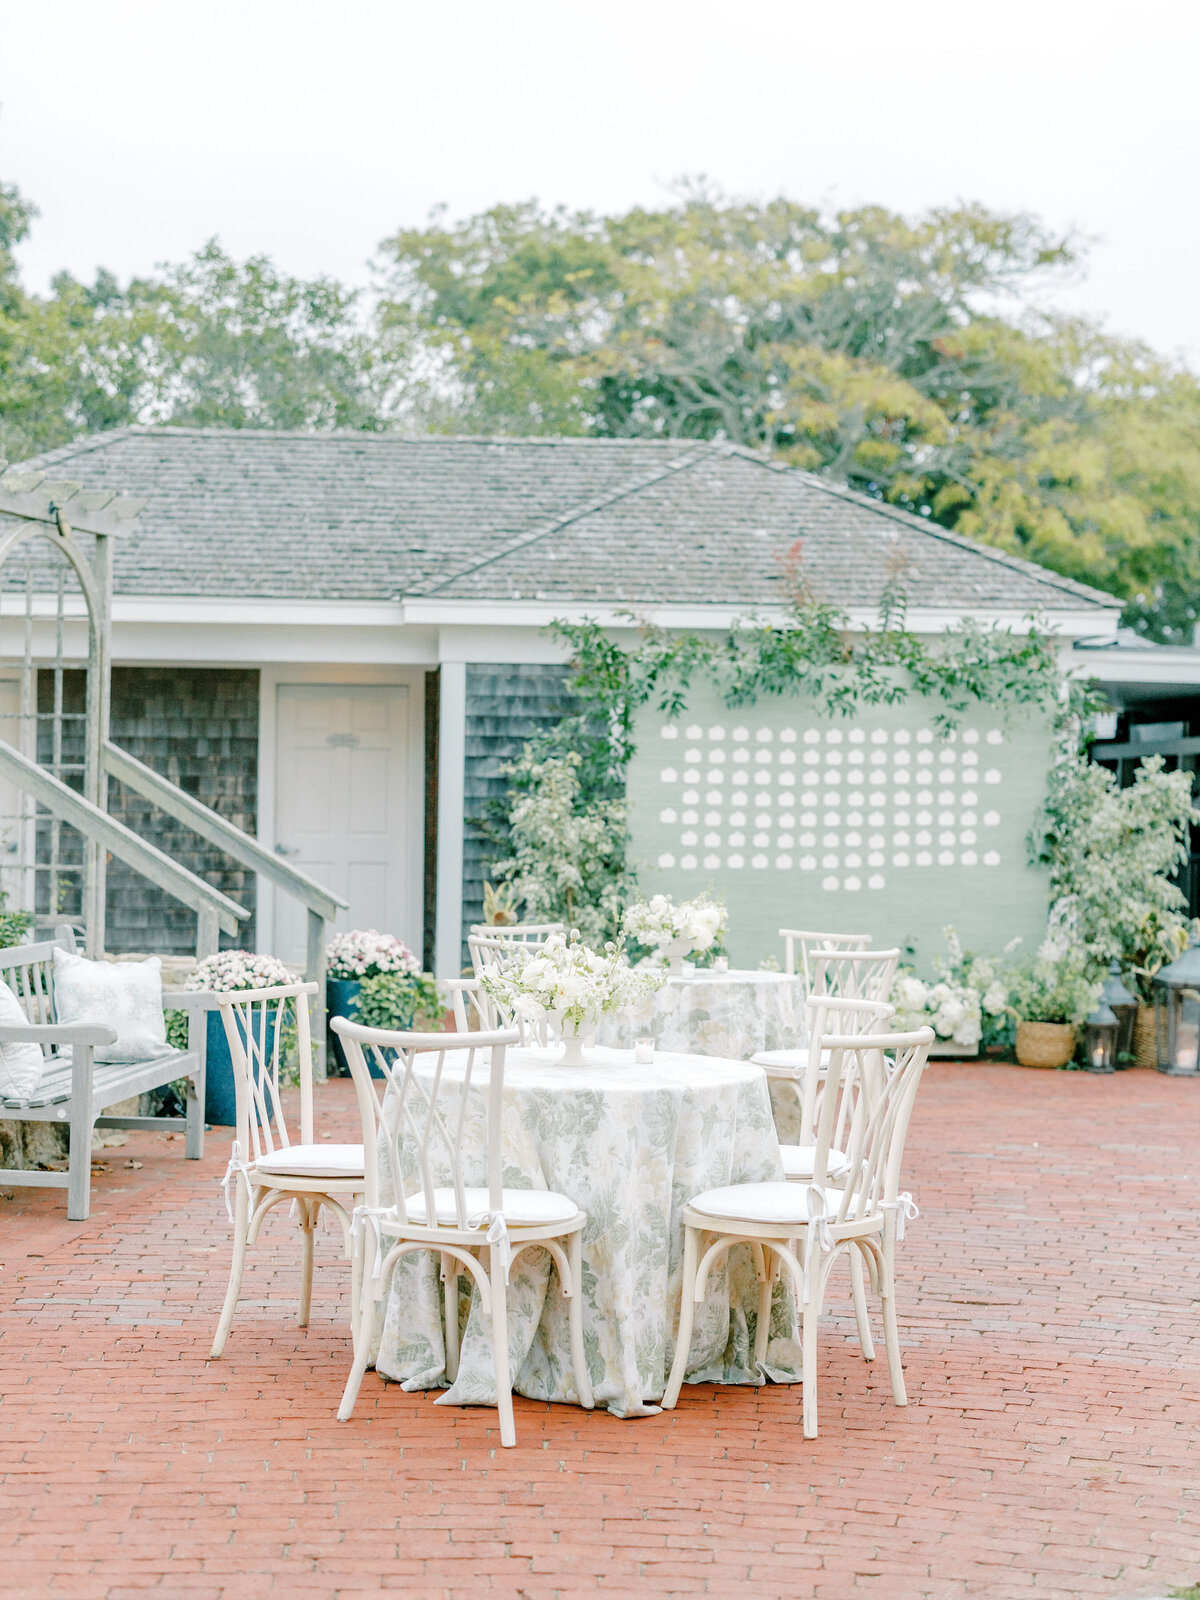 Outdoor wedding reception with floral tablecloths and a green seating chart display decorated with greenery